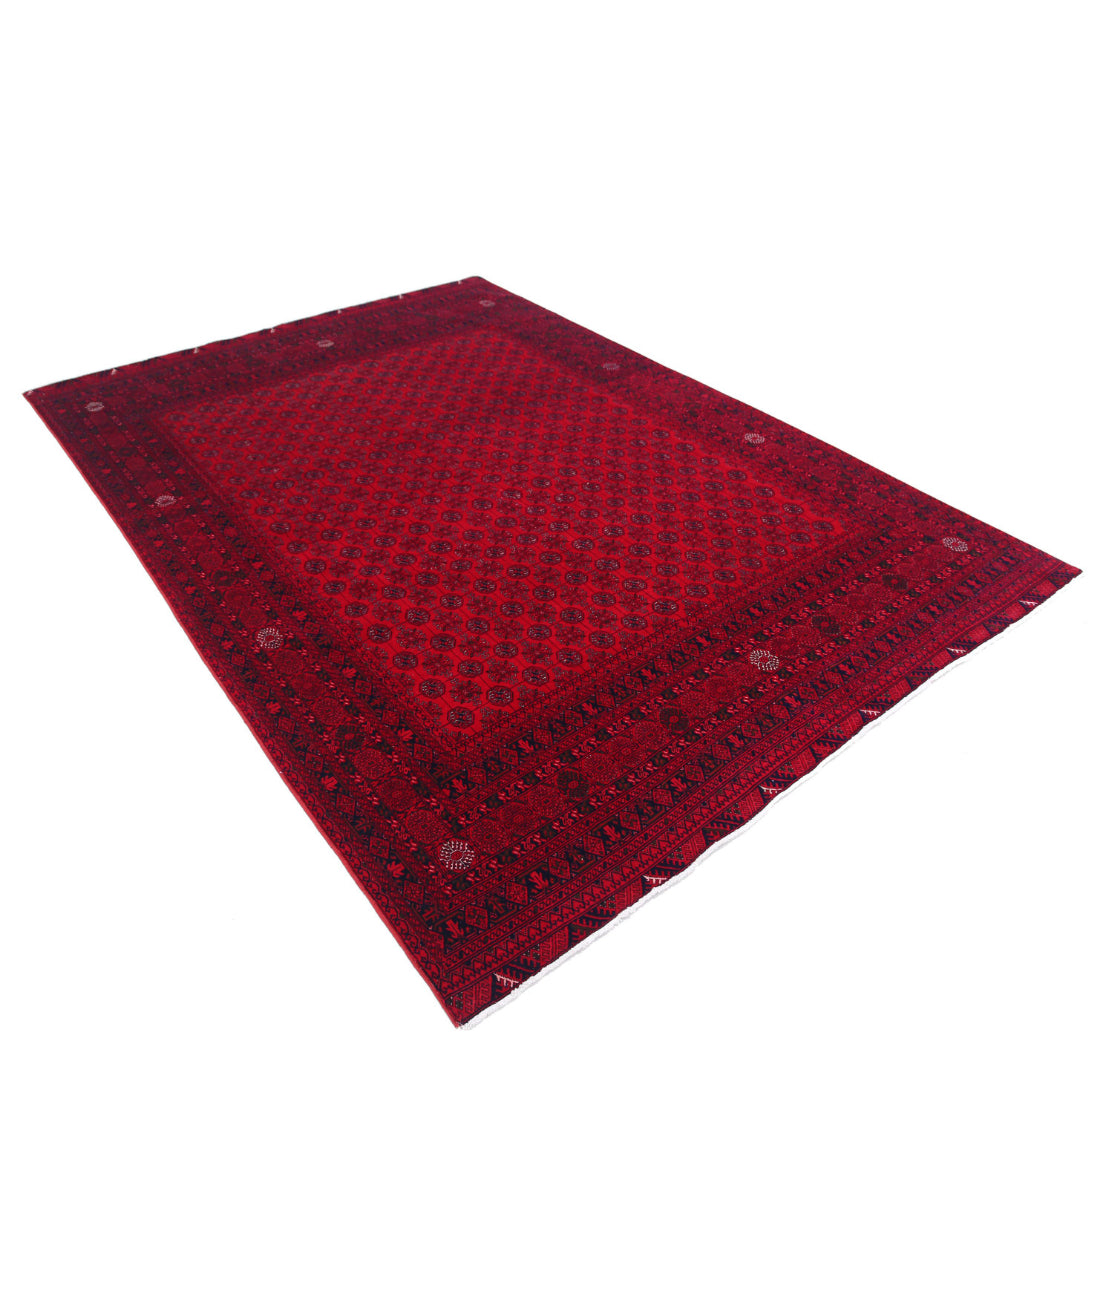 Hand Knotted Afghan Beljik Wool Rug - 6'7'' x 9'4'' 6'7'' x 9'4'' (198 X 280) / Red / Red